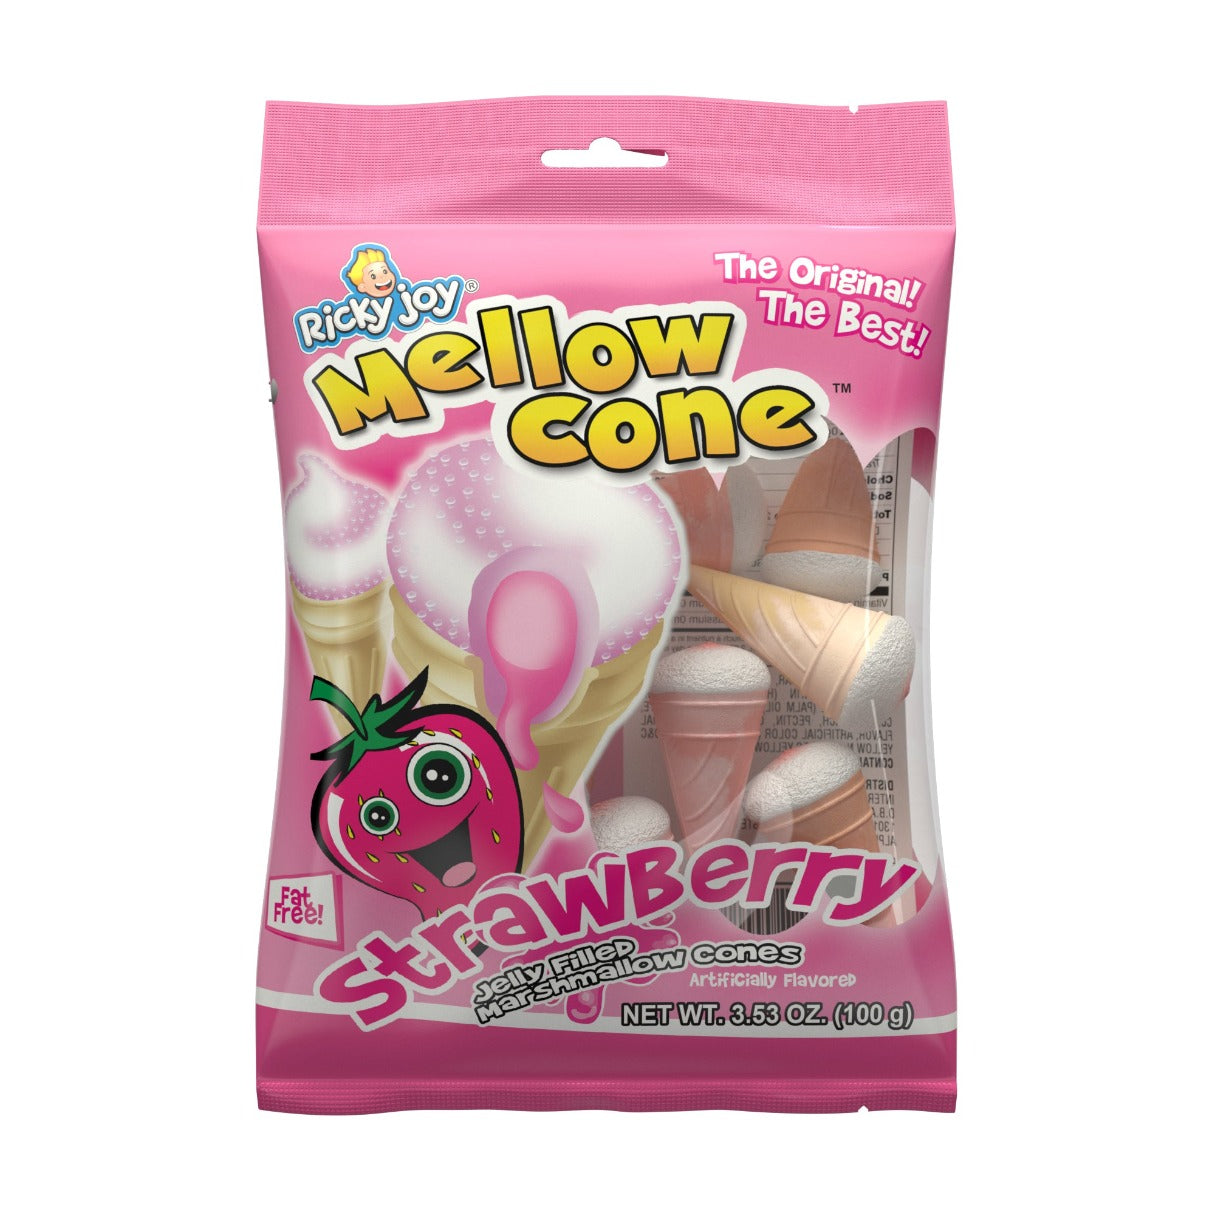 Ricky Joy Mellow Cones Strawberry Jelly Filled Marshmallow Cones 3.53oz - 18ct